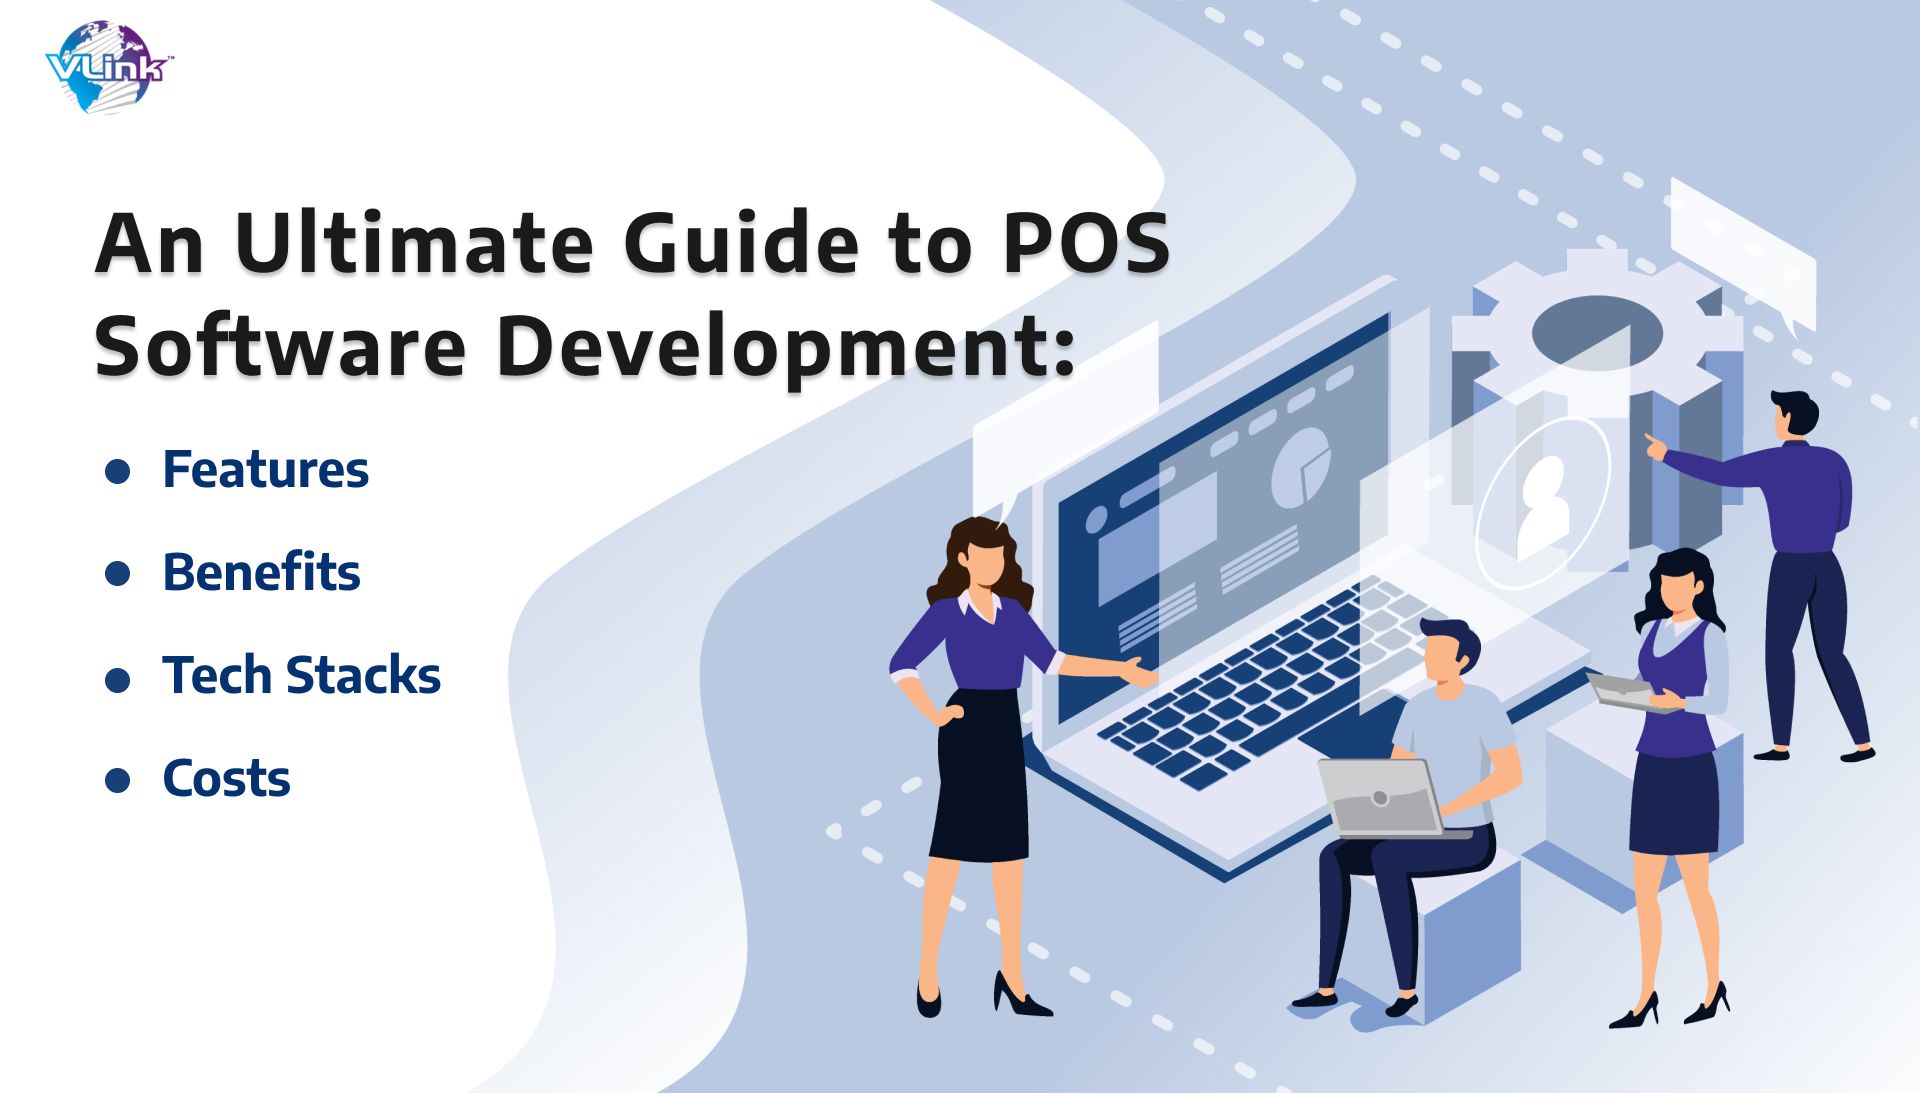 An Ultimate Guide to POS Software Development